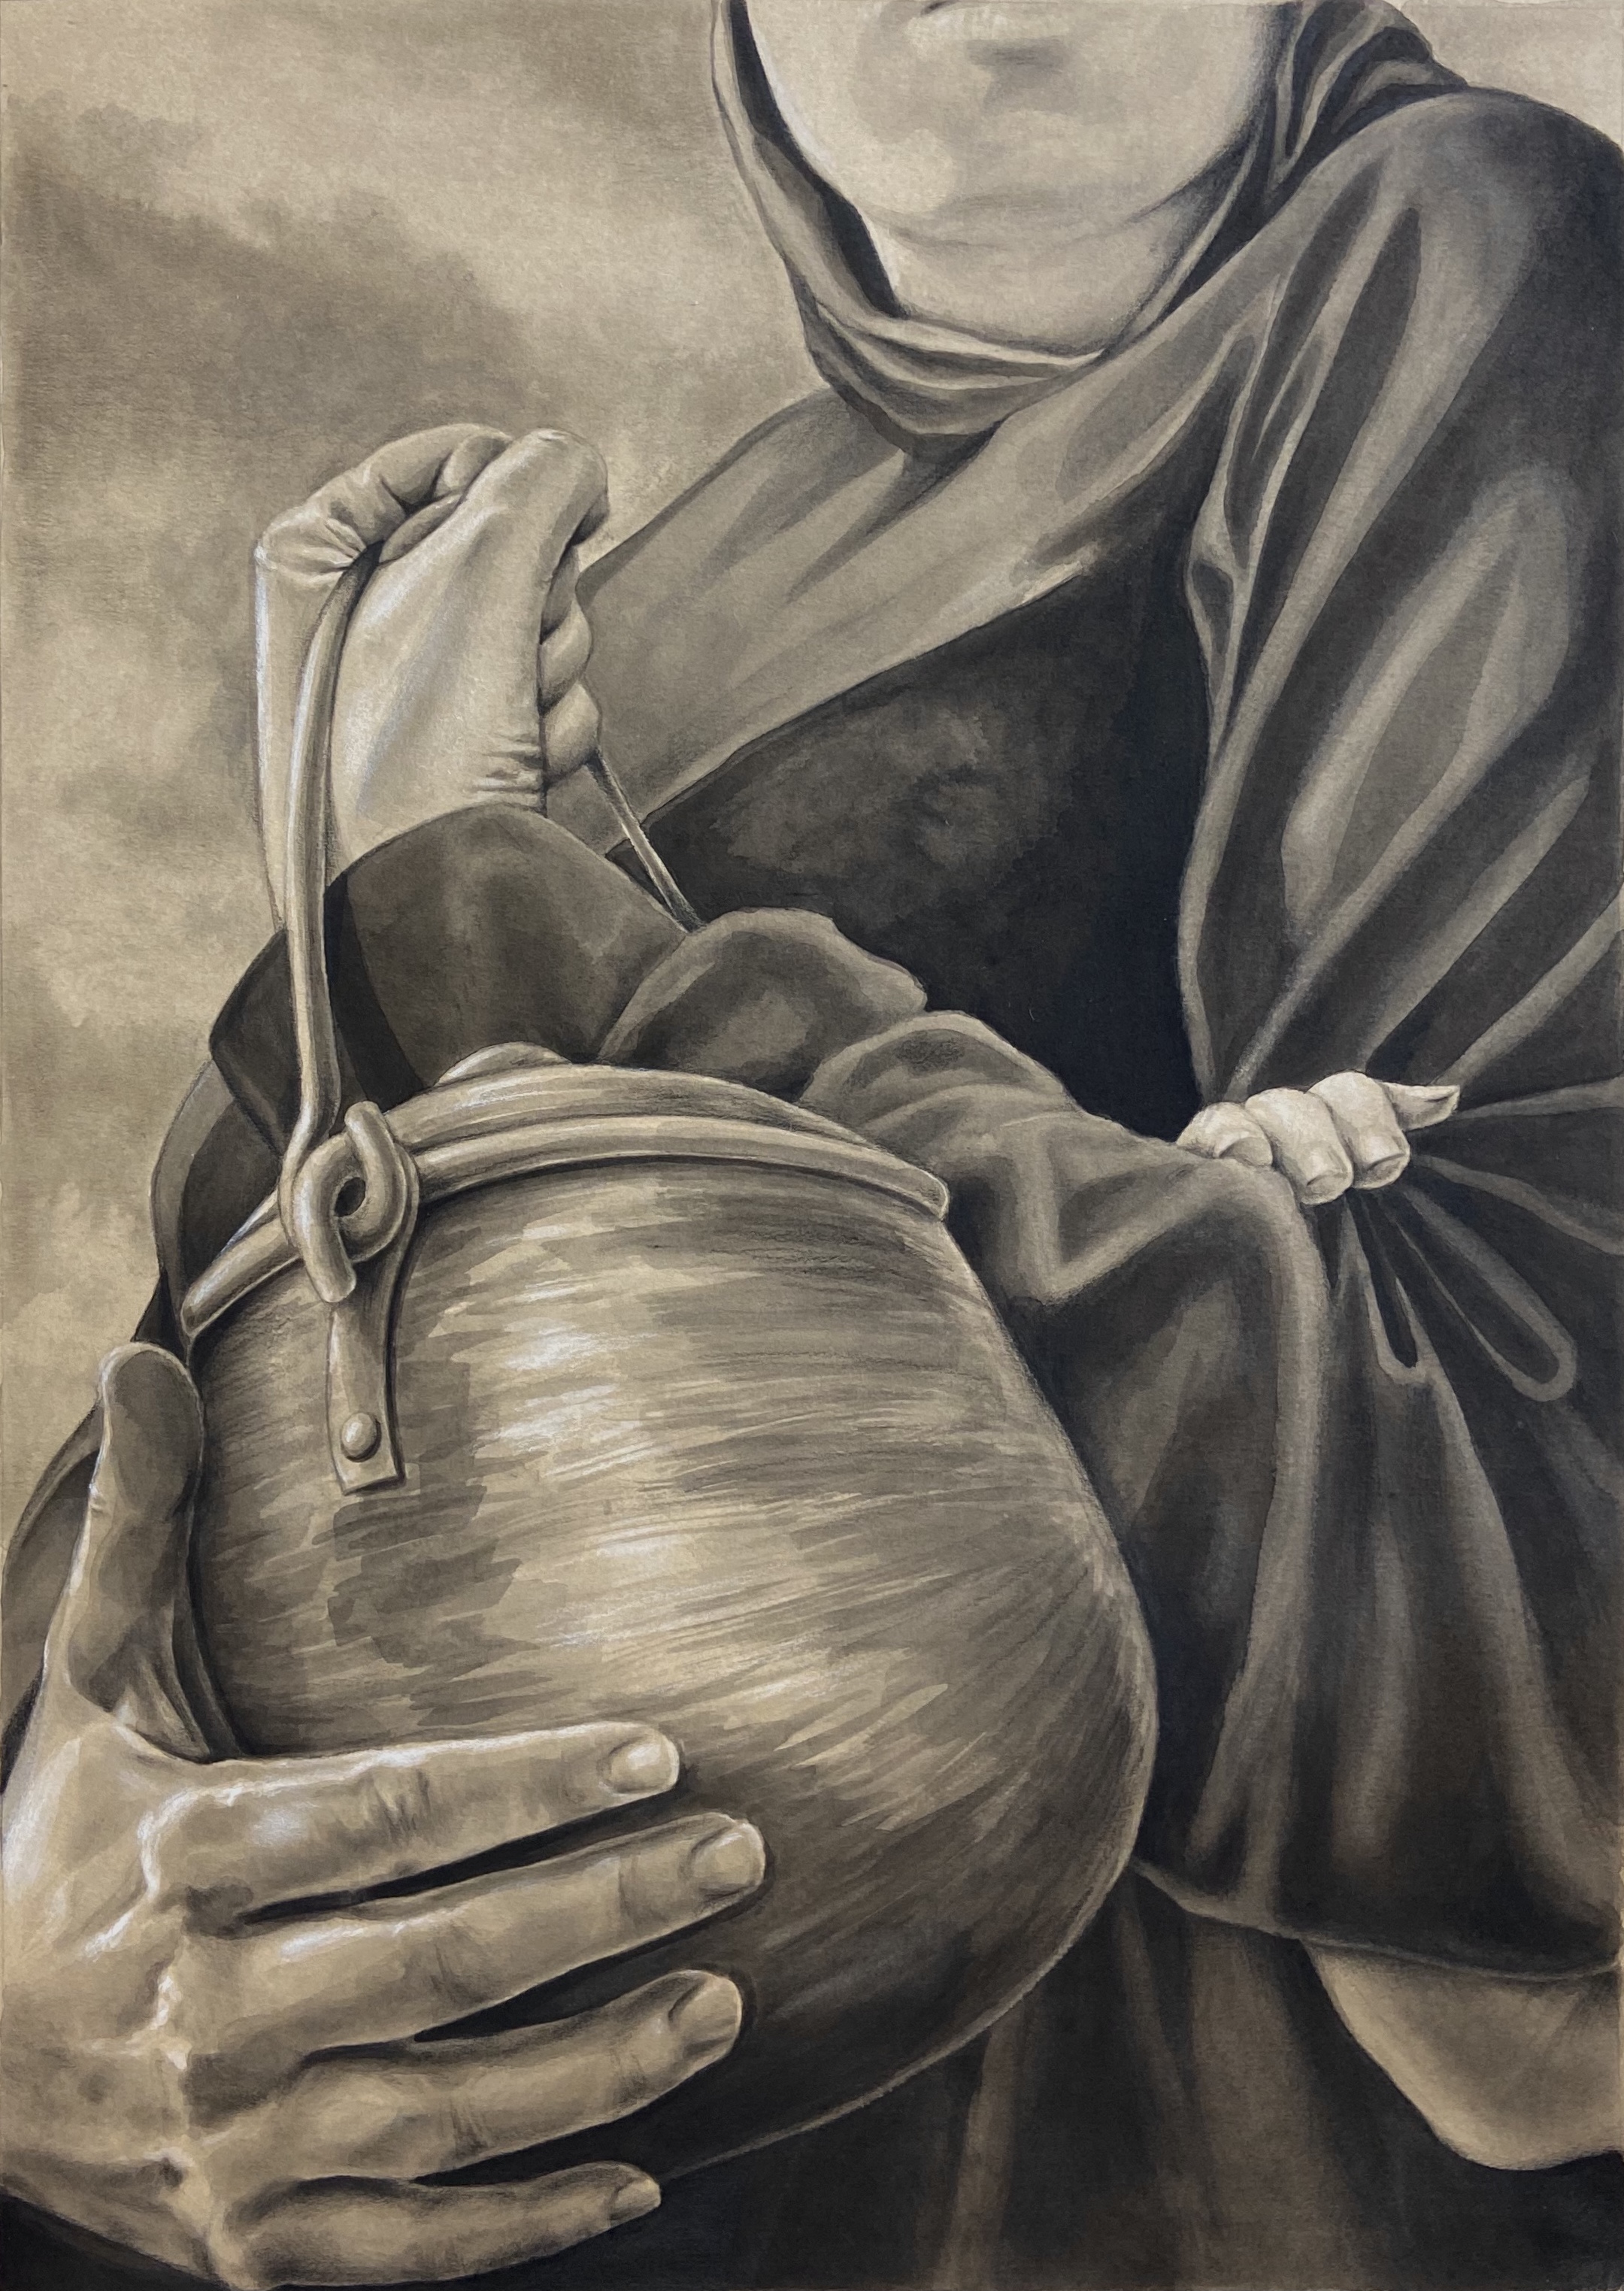 A depiction of my great-great grandmother attempting to smuggle gold in a small pot filled with pickles as she and her daughter are forced to leave behind their home.